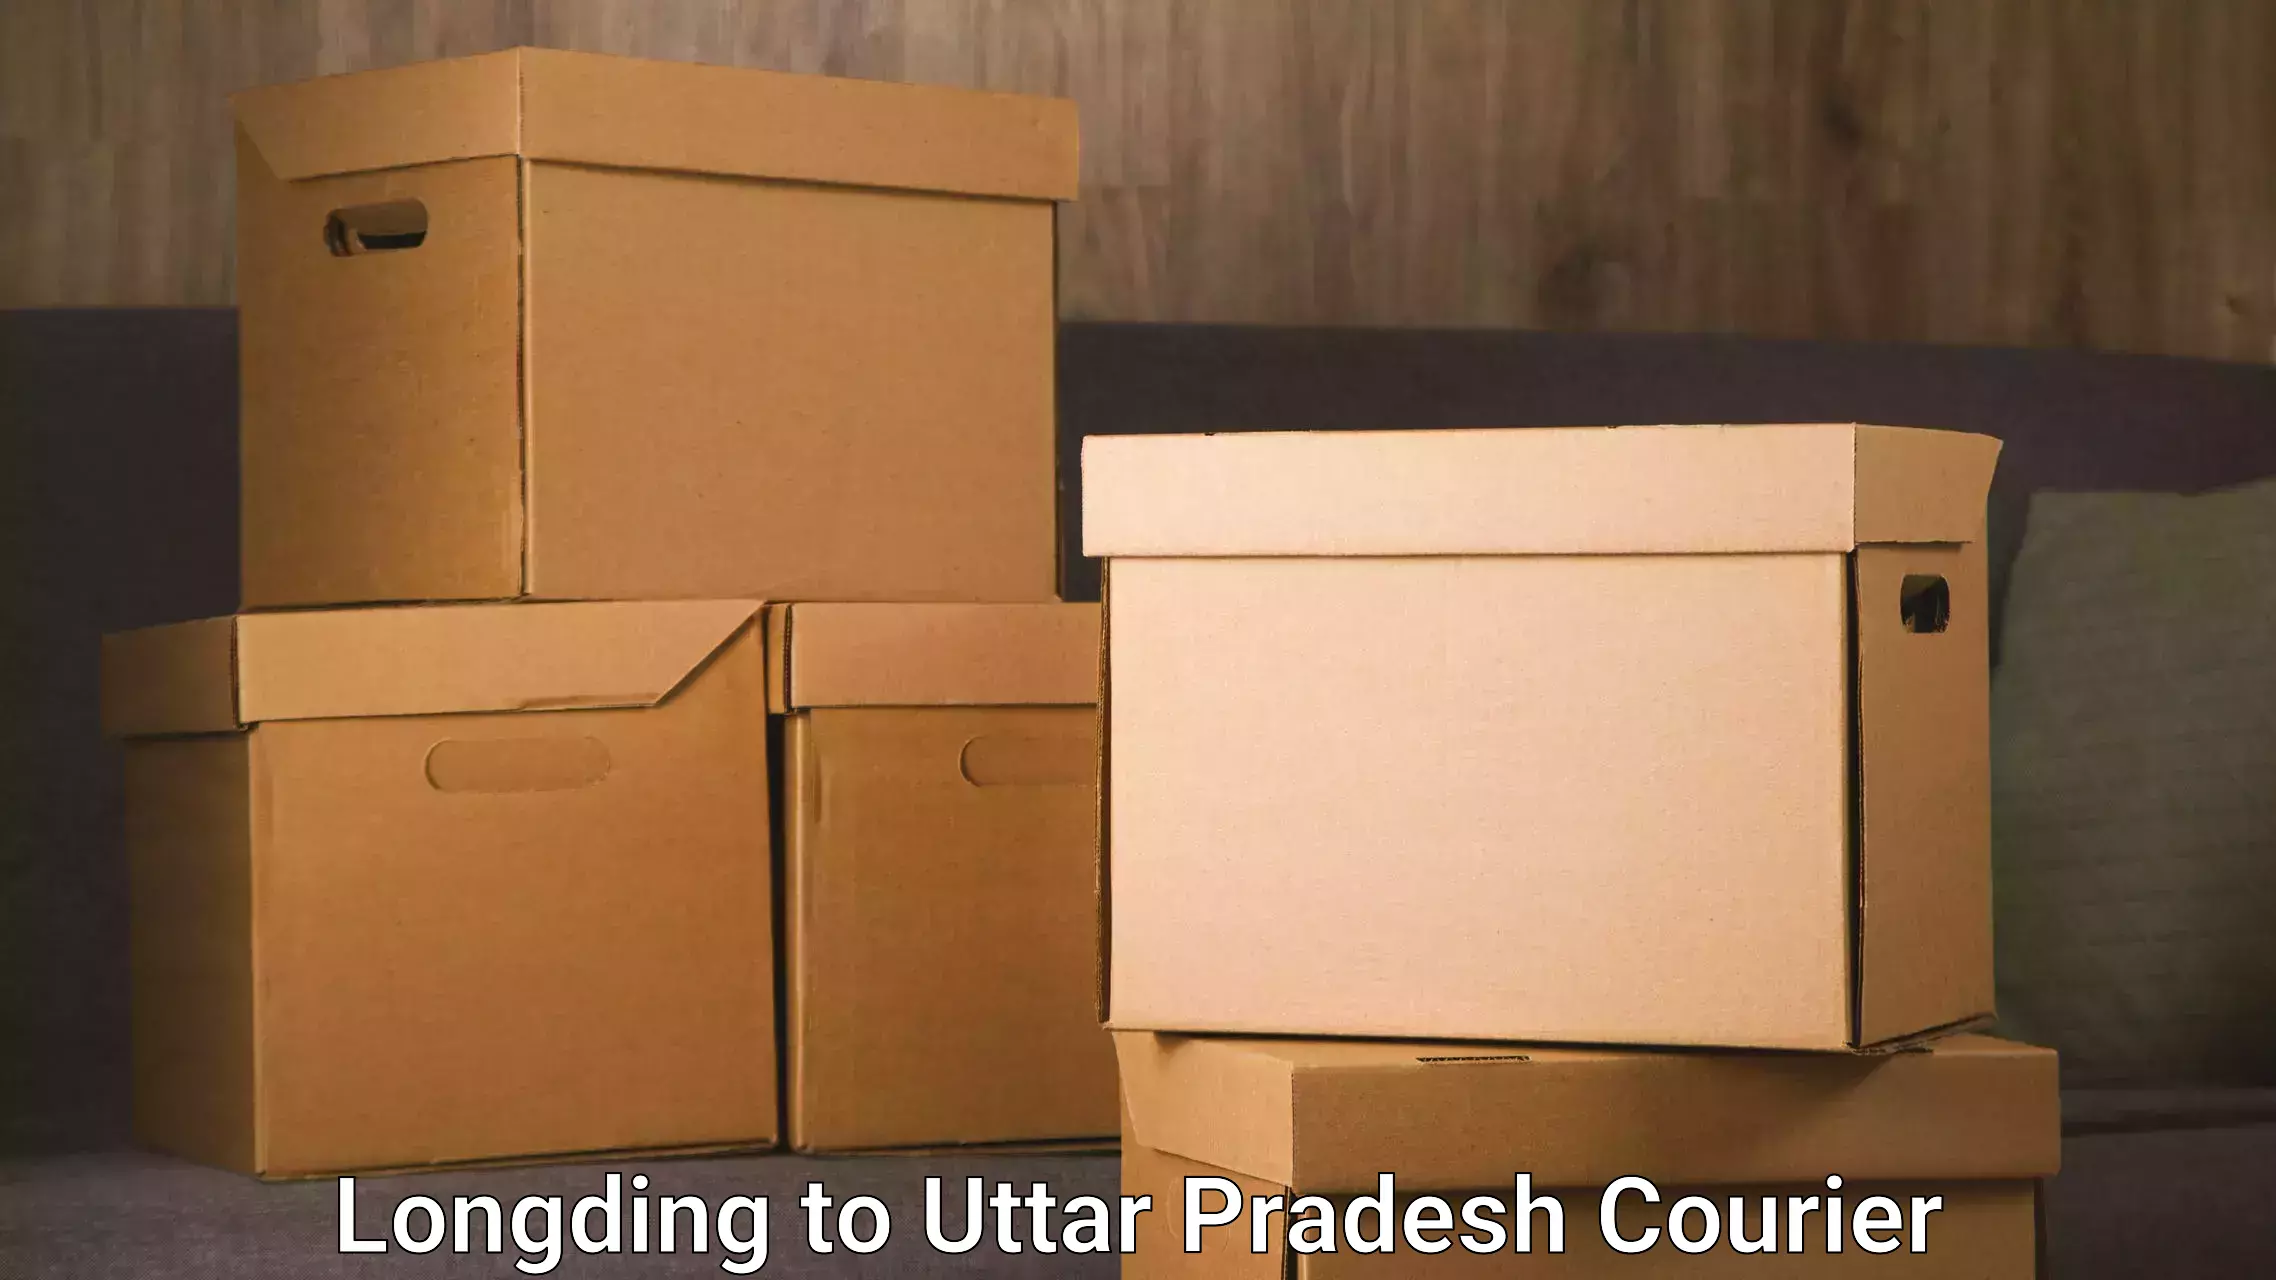 Customizable delivery plans Longding to Aligarh